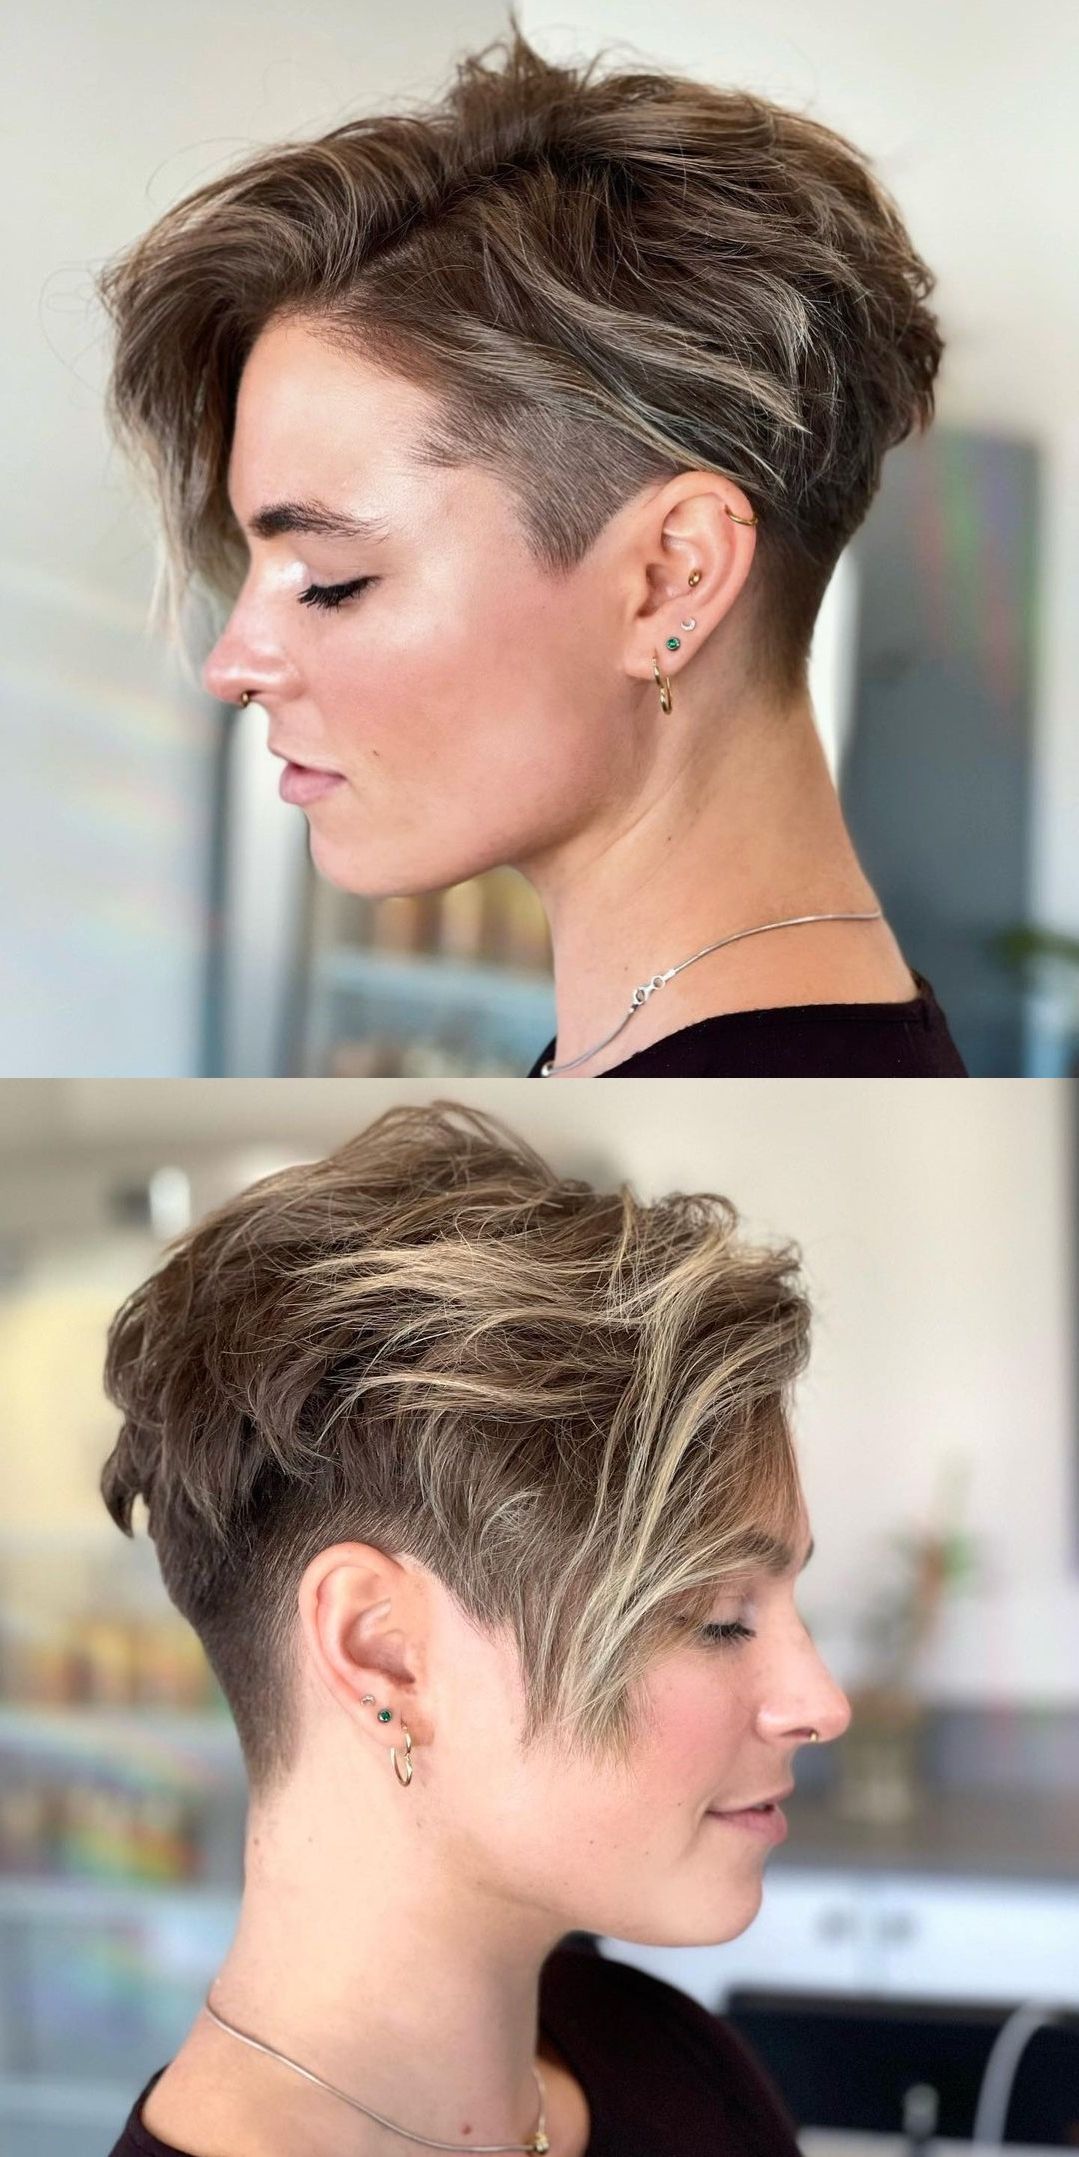 The 39 Coolest Undercut Pixie Cuts Found For 2022 Regarding Side Parted Pixie Hairstyles With An Undercut (View 10 of 25)